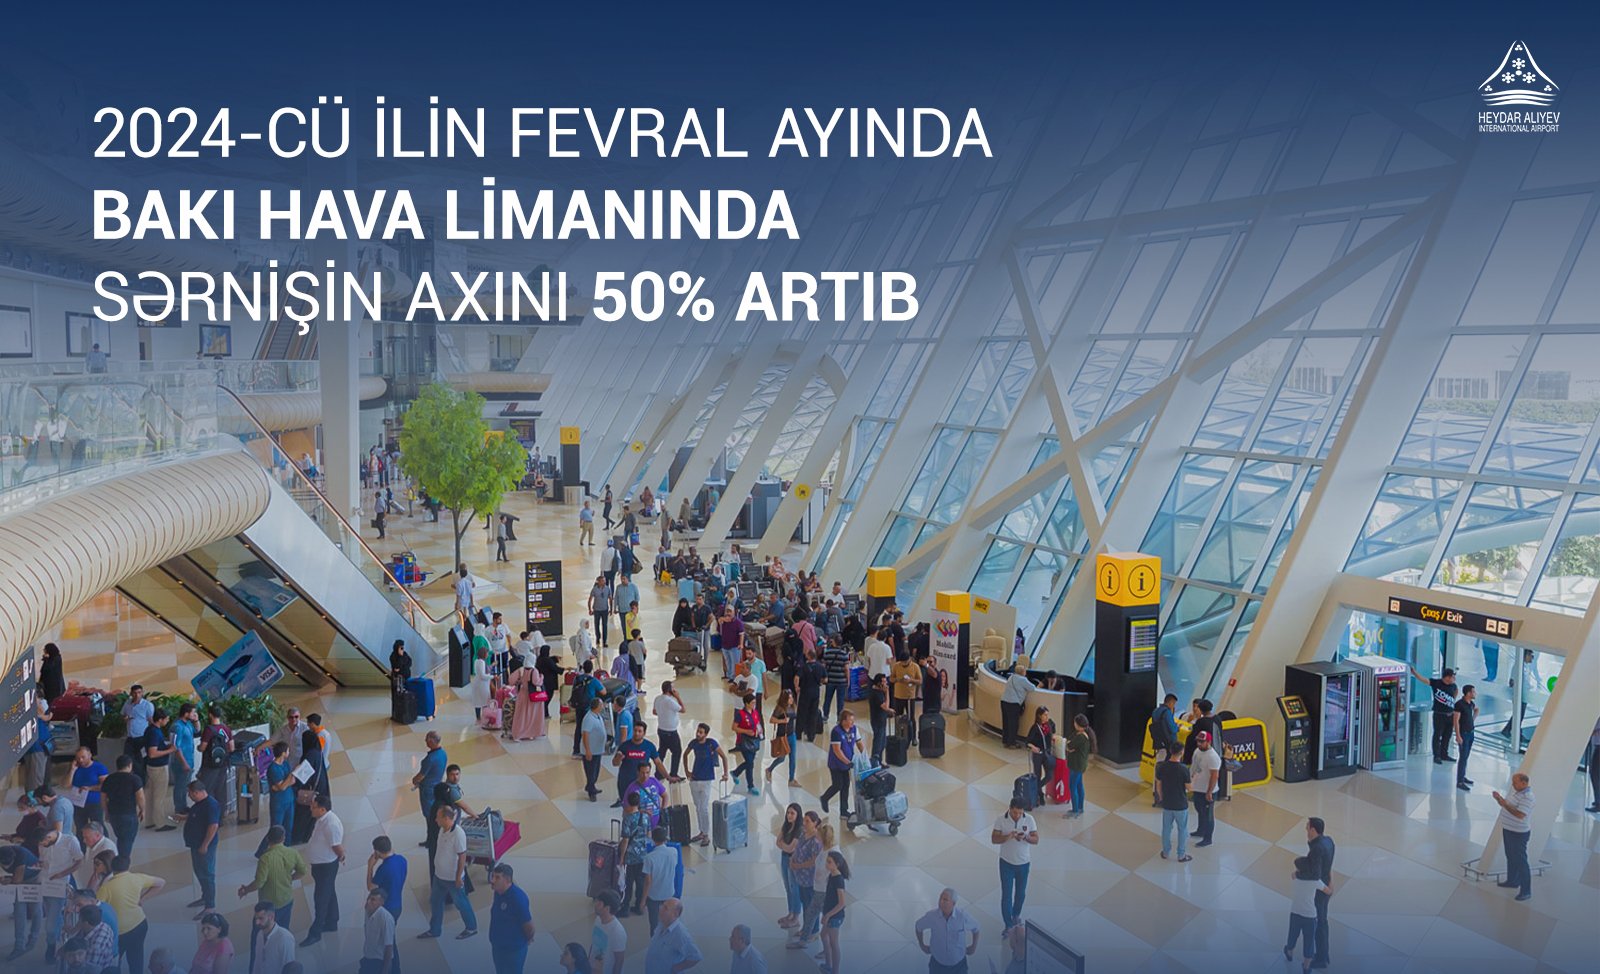 In February 2024, passenger flow at Baku airport increased by 50%